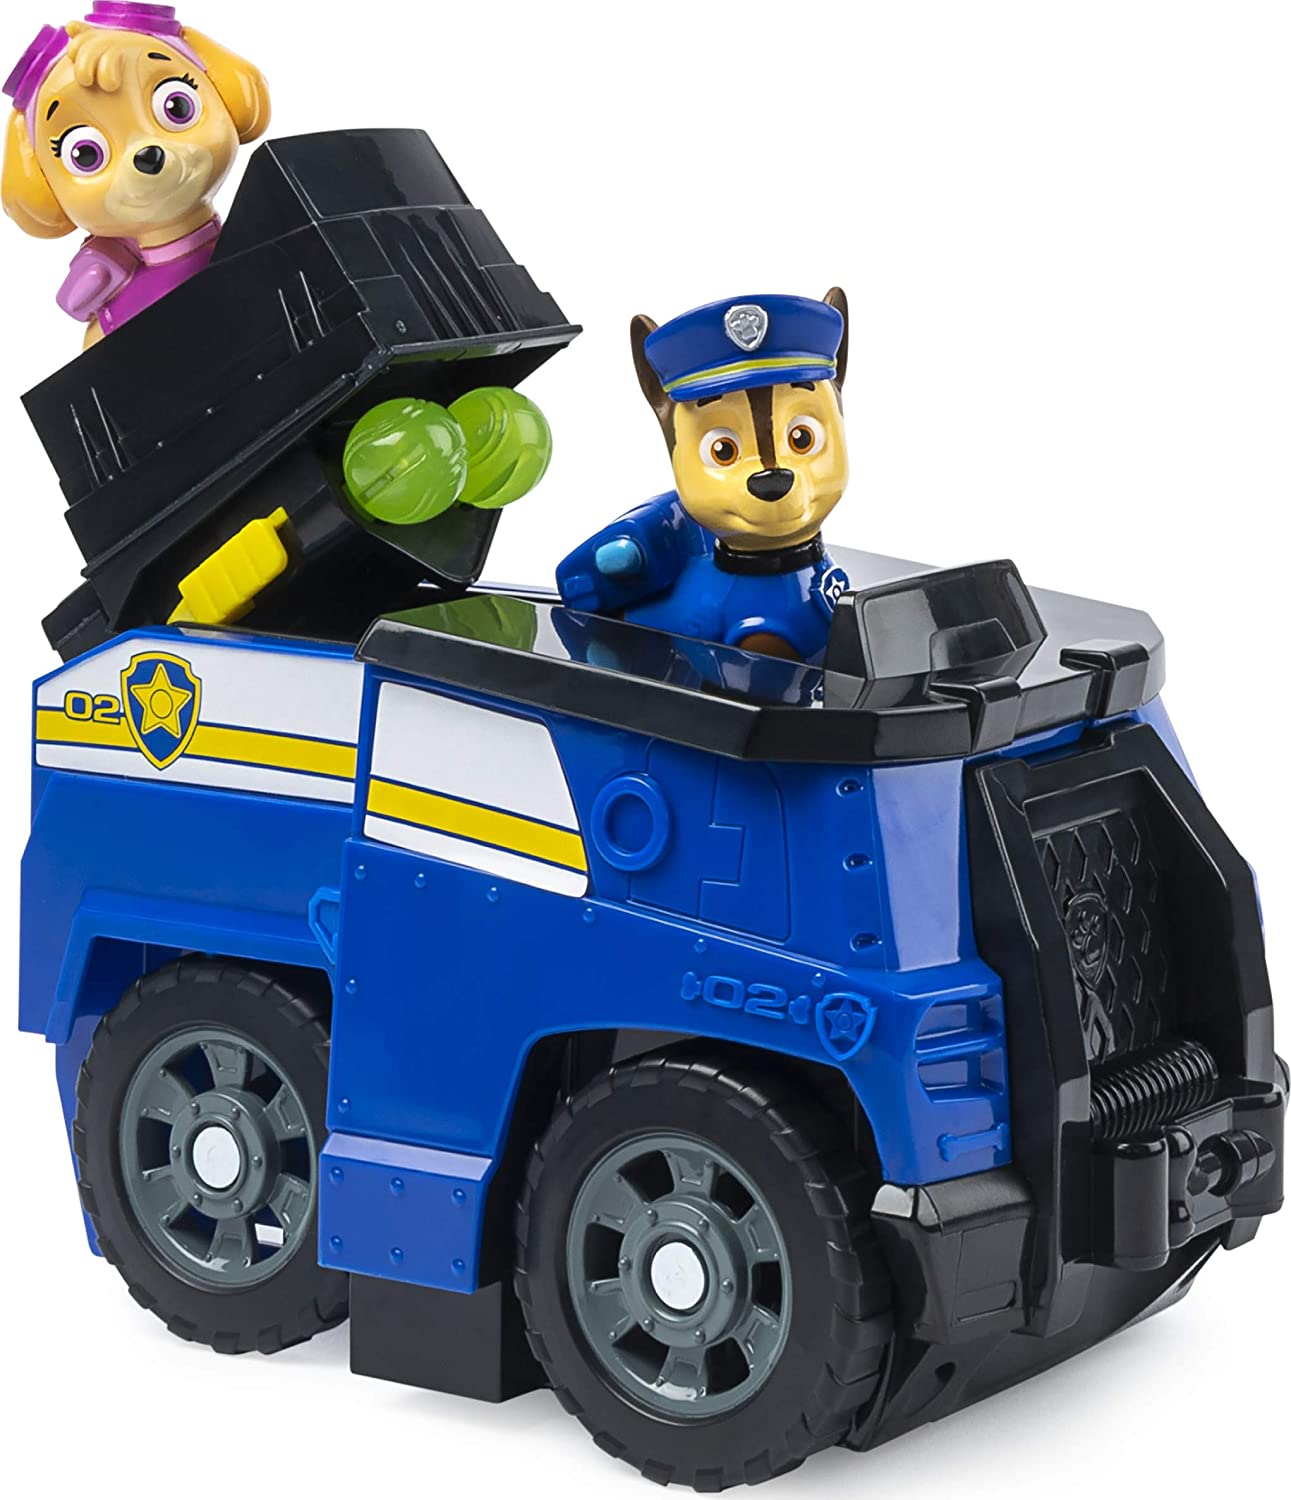 Paw Patrol 6056714 Chase Split-Second 2-in-1 Transforming Police Cruiser Vehicle with 2 Collectible Figures - WERONE